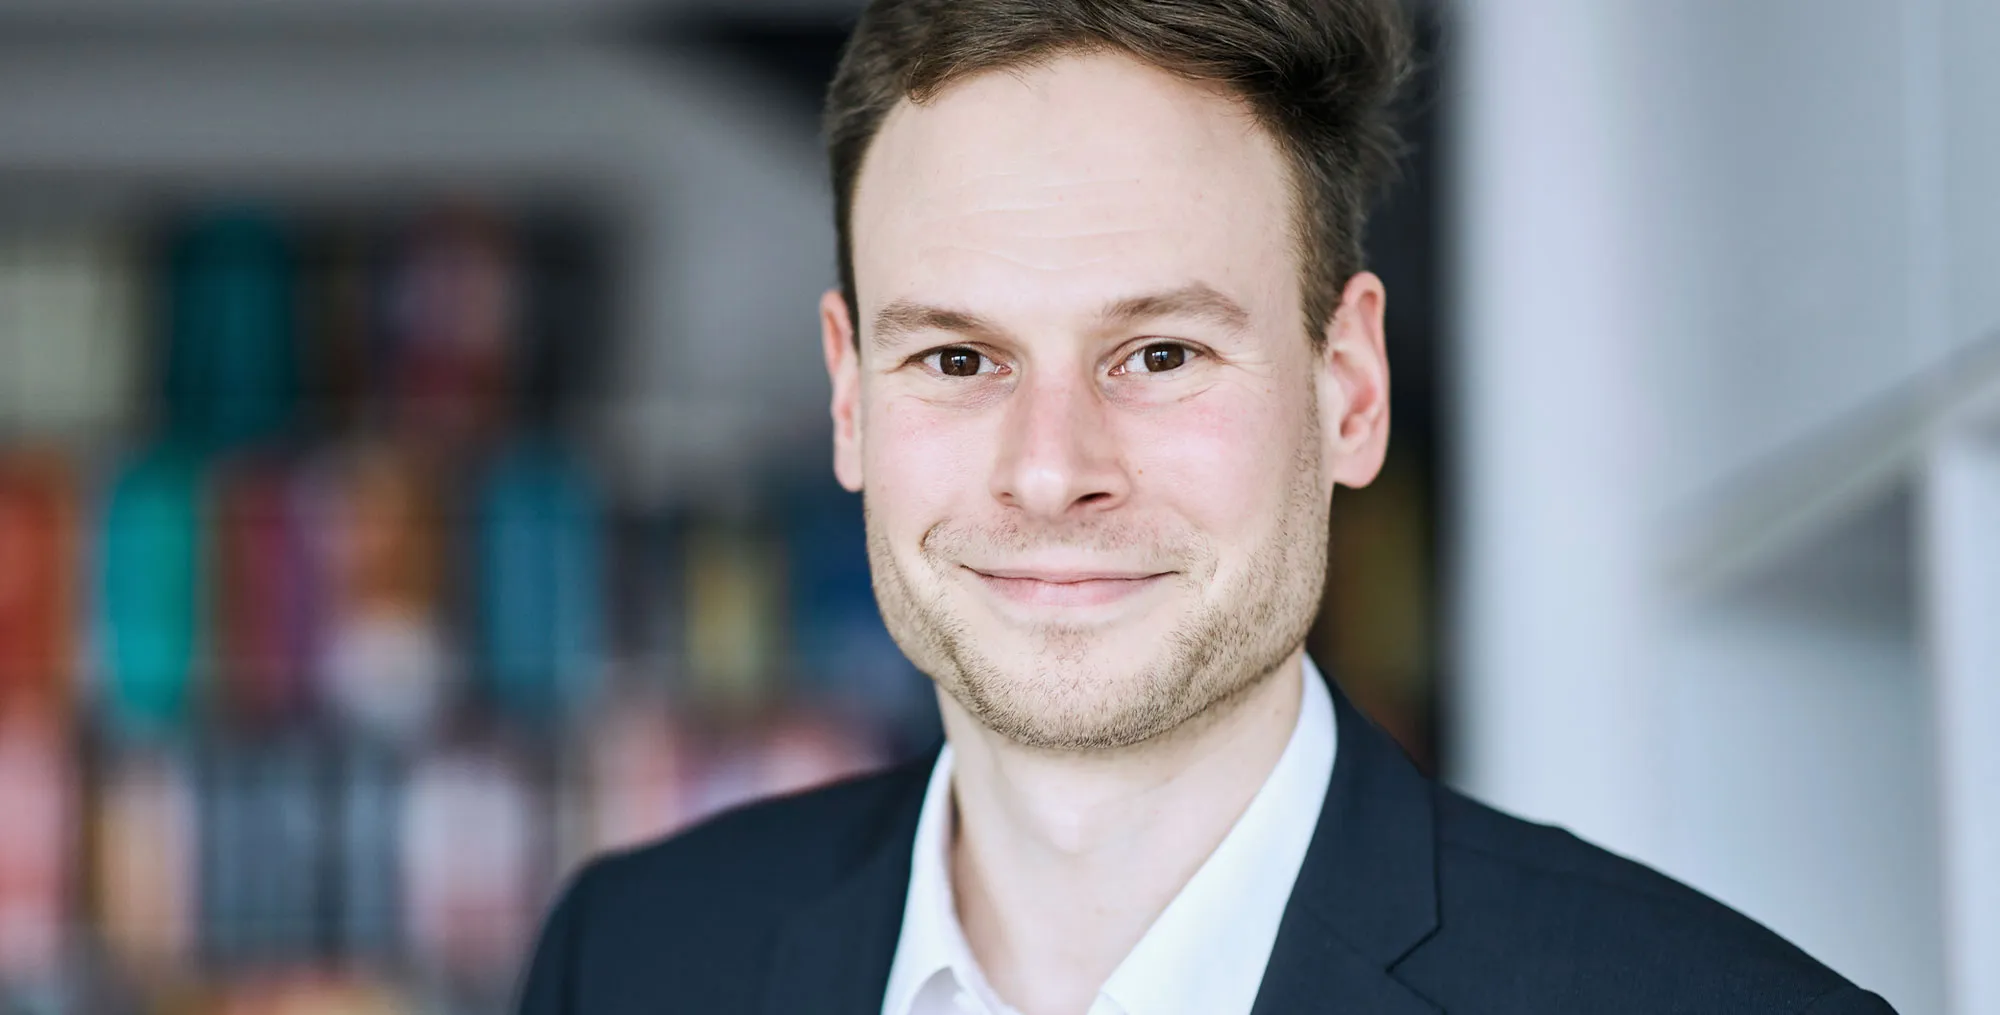 Gregor Wittkämper of Börgers lawyers, specialised law firm and notary for building law, real estate law, architects law, procurement law, commercial tenancy law, dispute consulting - Berlin, Hamburg, Stuttgart